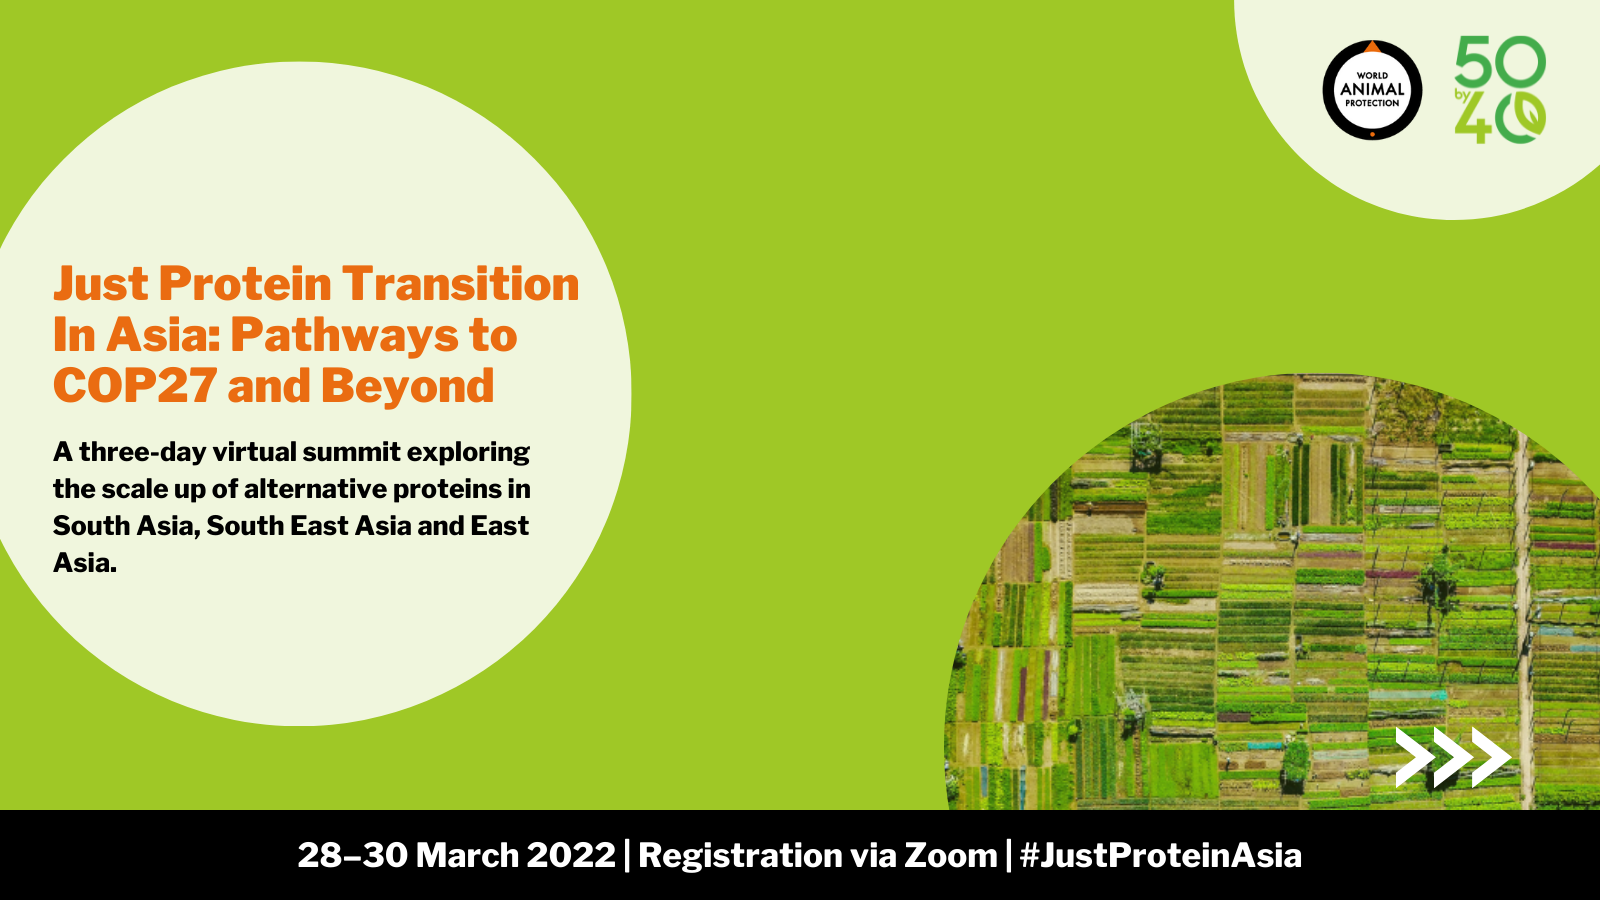 Just Protein Transition in Asia: Pathways to COP27 and Beyond